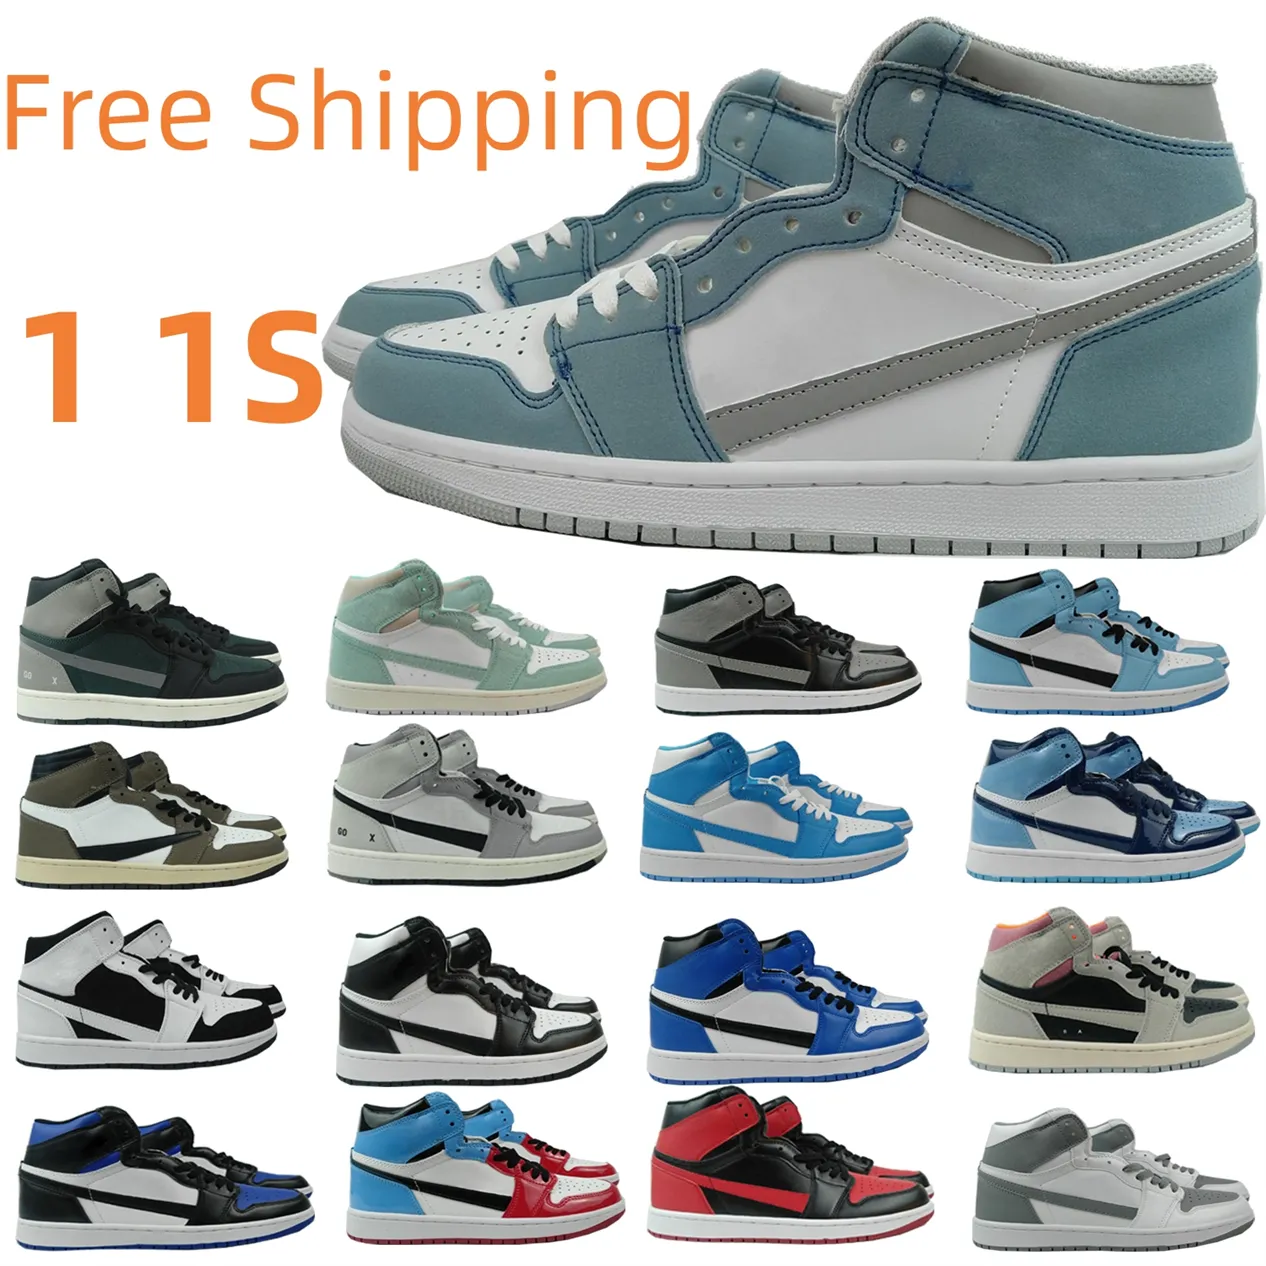 Jumpman 1 1s Blue Sneakers Breathable Basketball Shoes Black White Silver Men Women Trainers Walking Jogging Shoes Outdoor Running Shoes